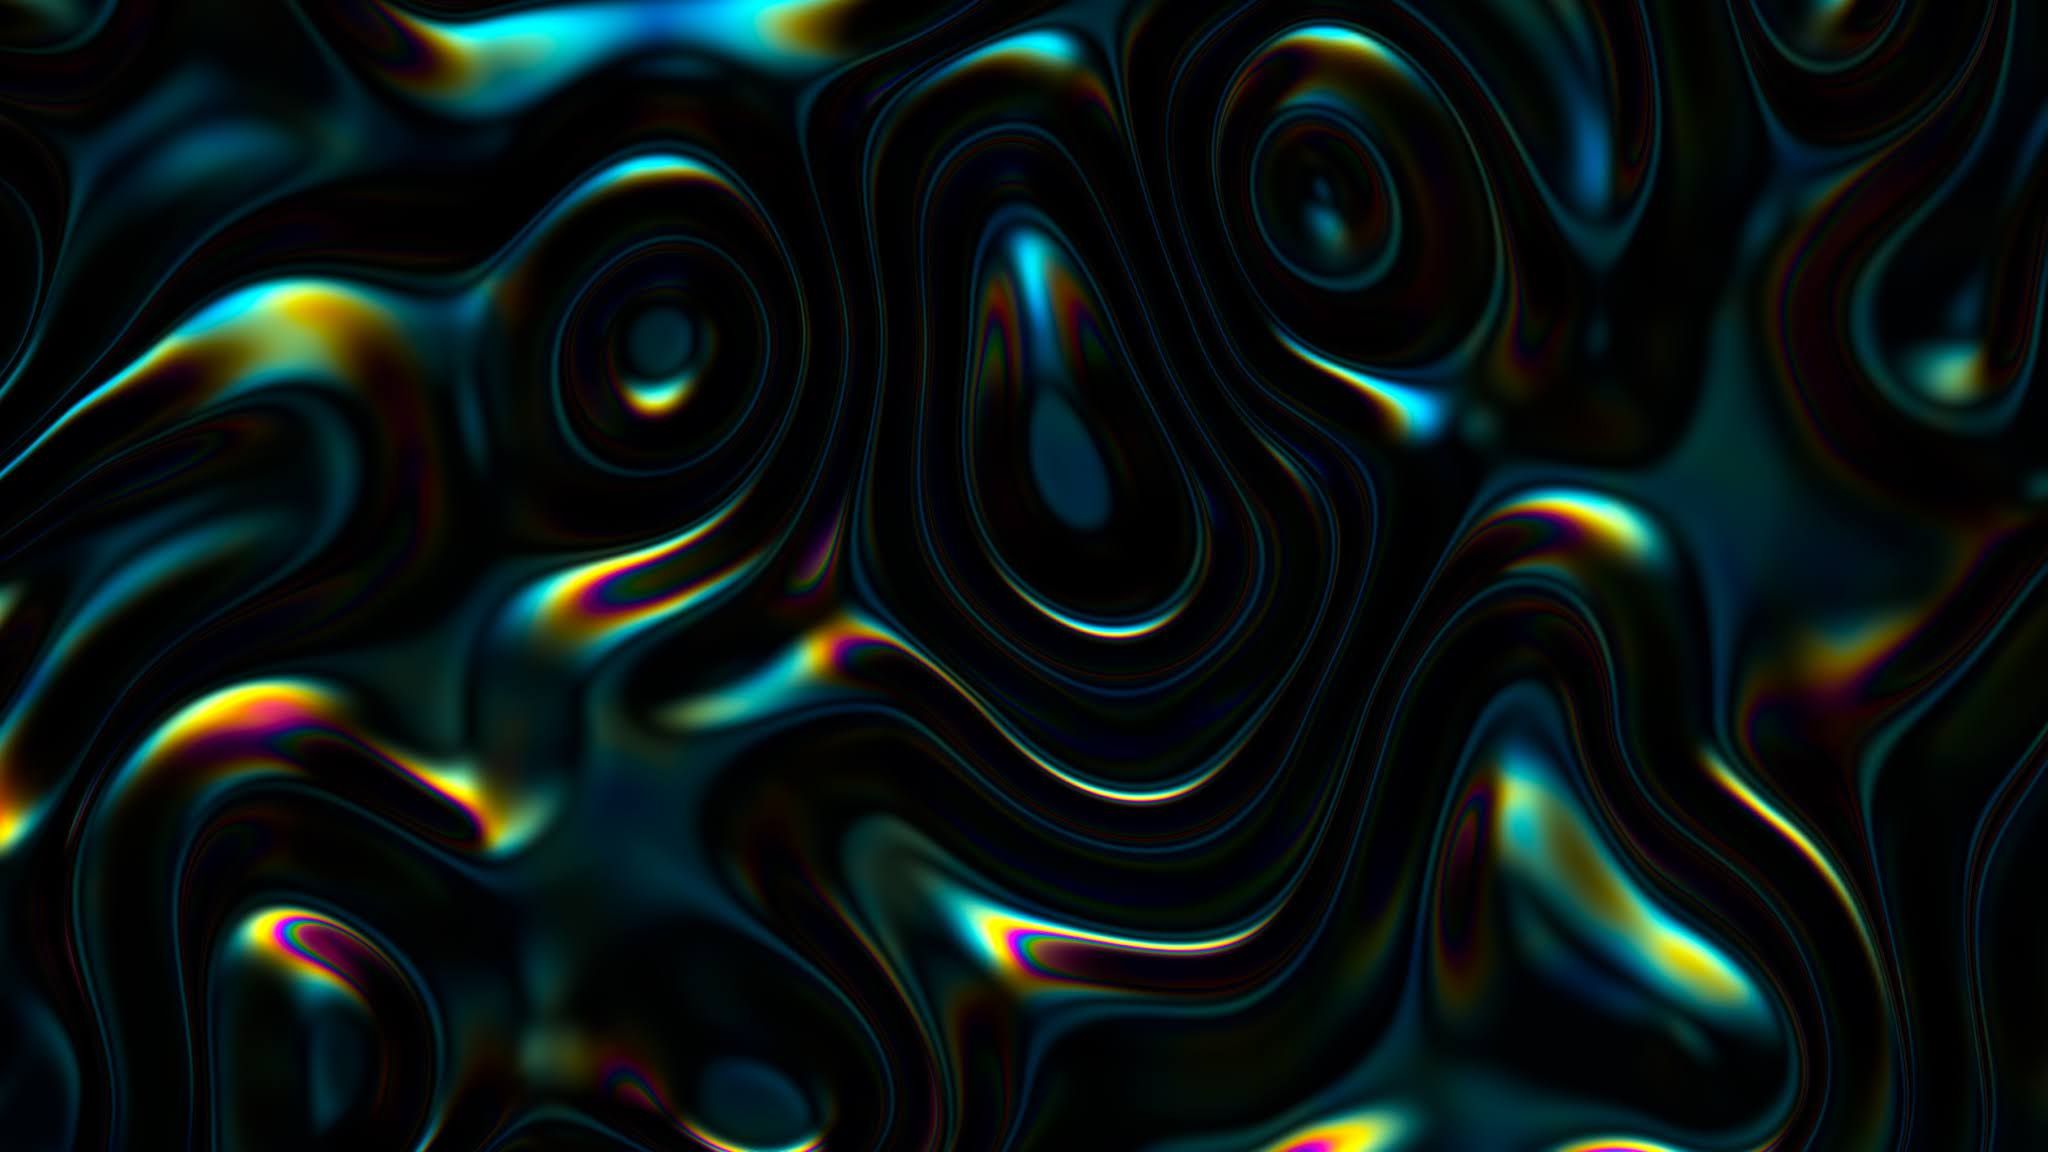 A colorful abstract pattern with swirling lines - Dark